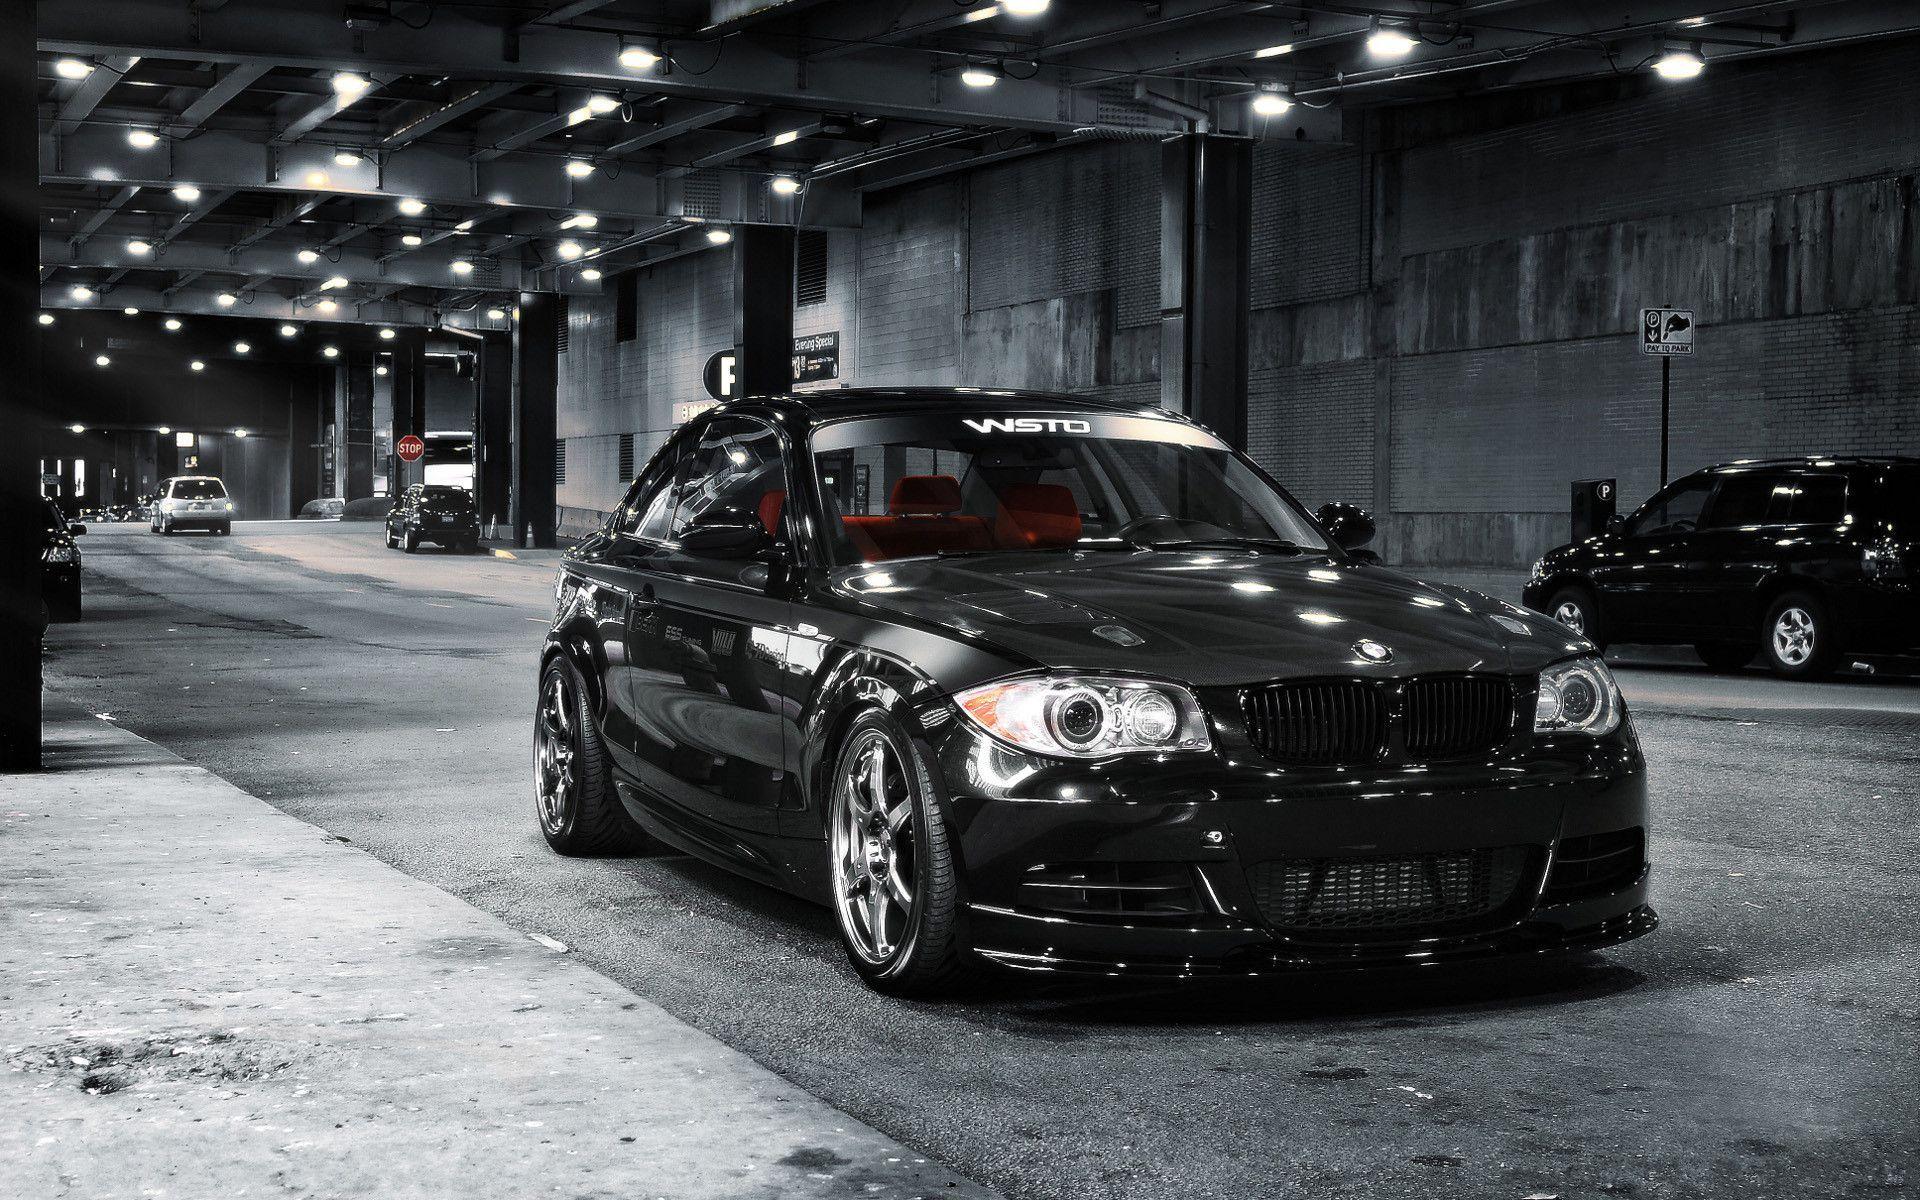 BMW 135i wallpaper and image, picture, photo